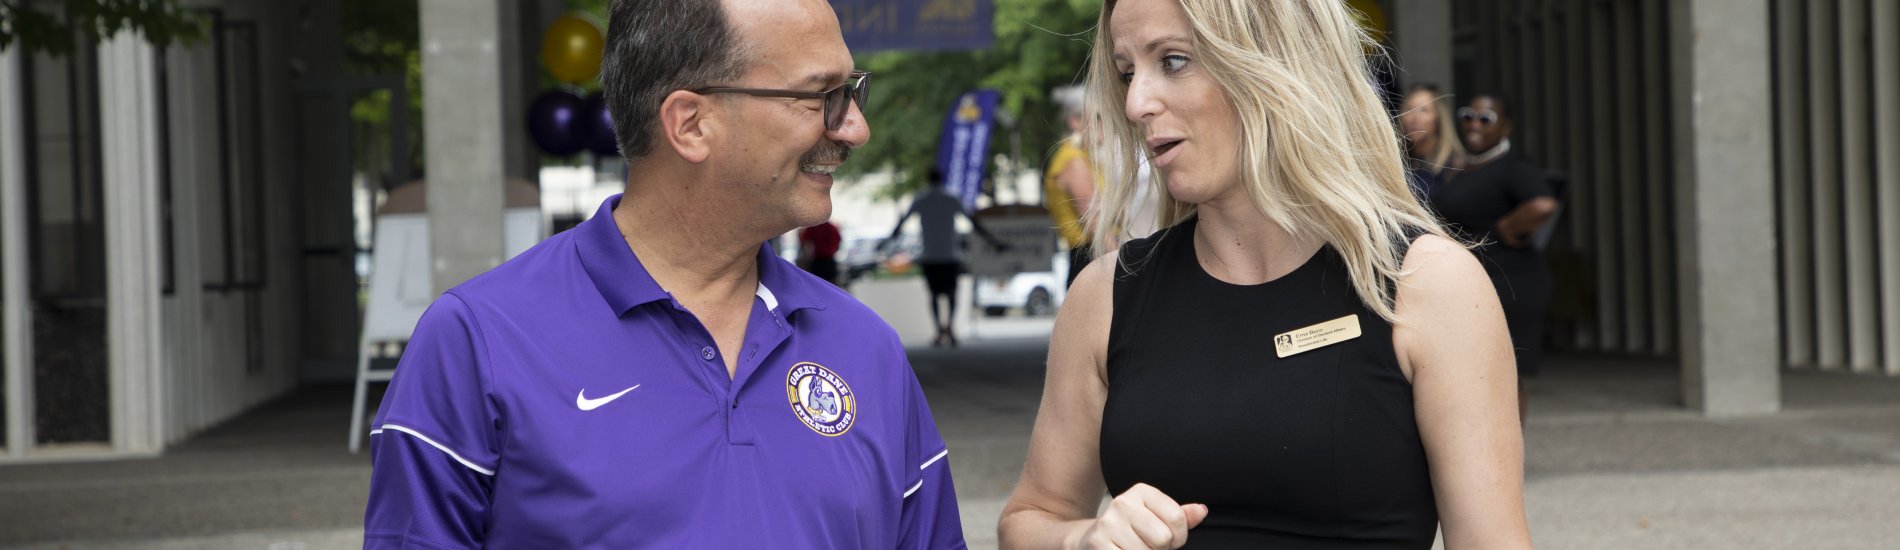 Ema Buco, Assistant Director for Residential Life, speaks with the UAlbany President outside Indigenous Quad on a move-in day